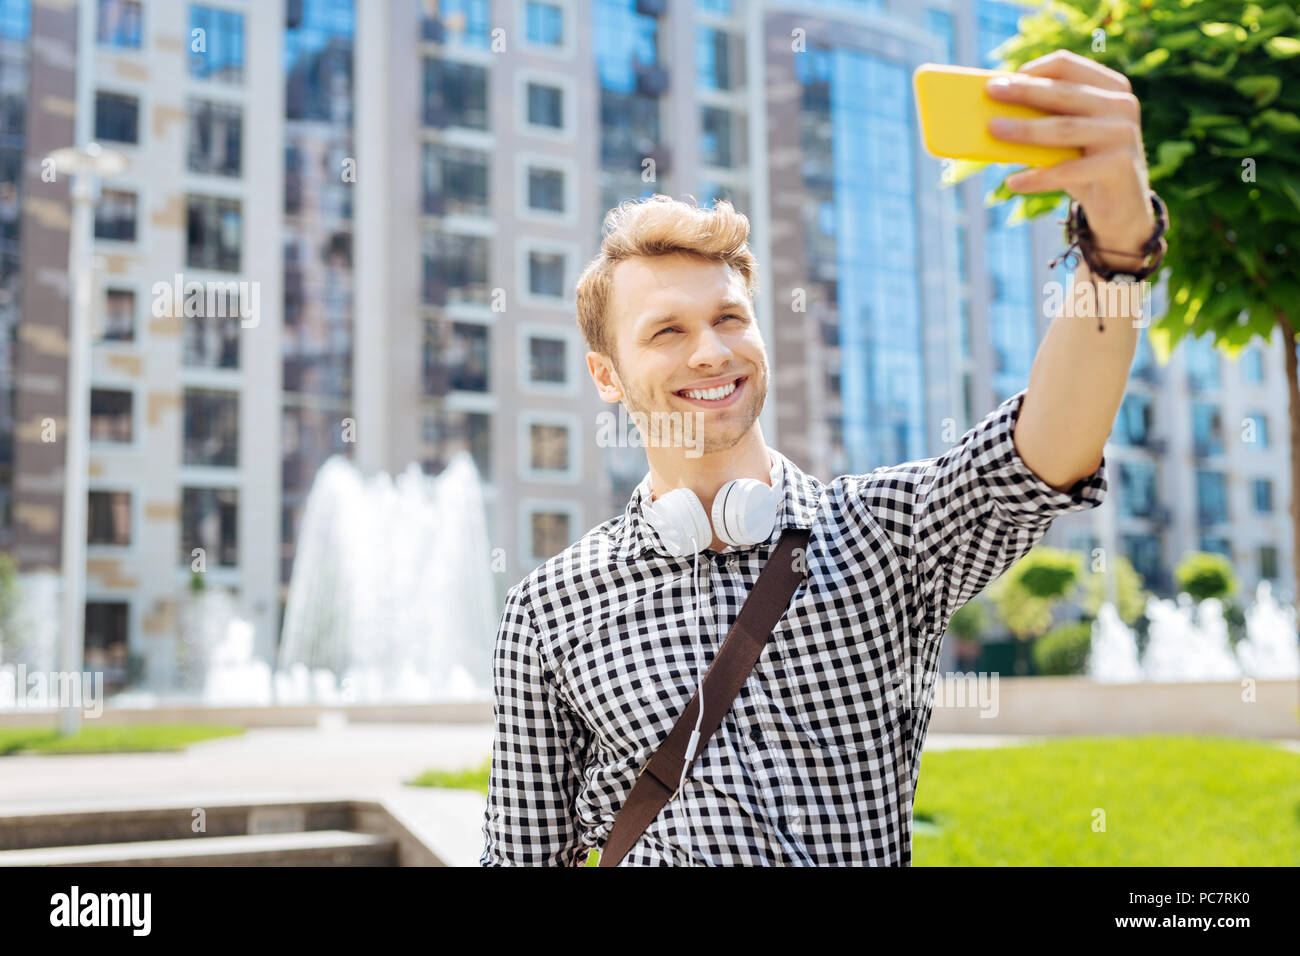 Delighted positive man taking a selfie Stock Photo